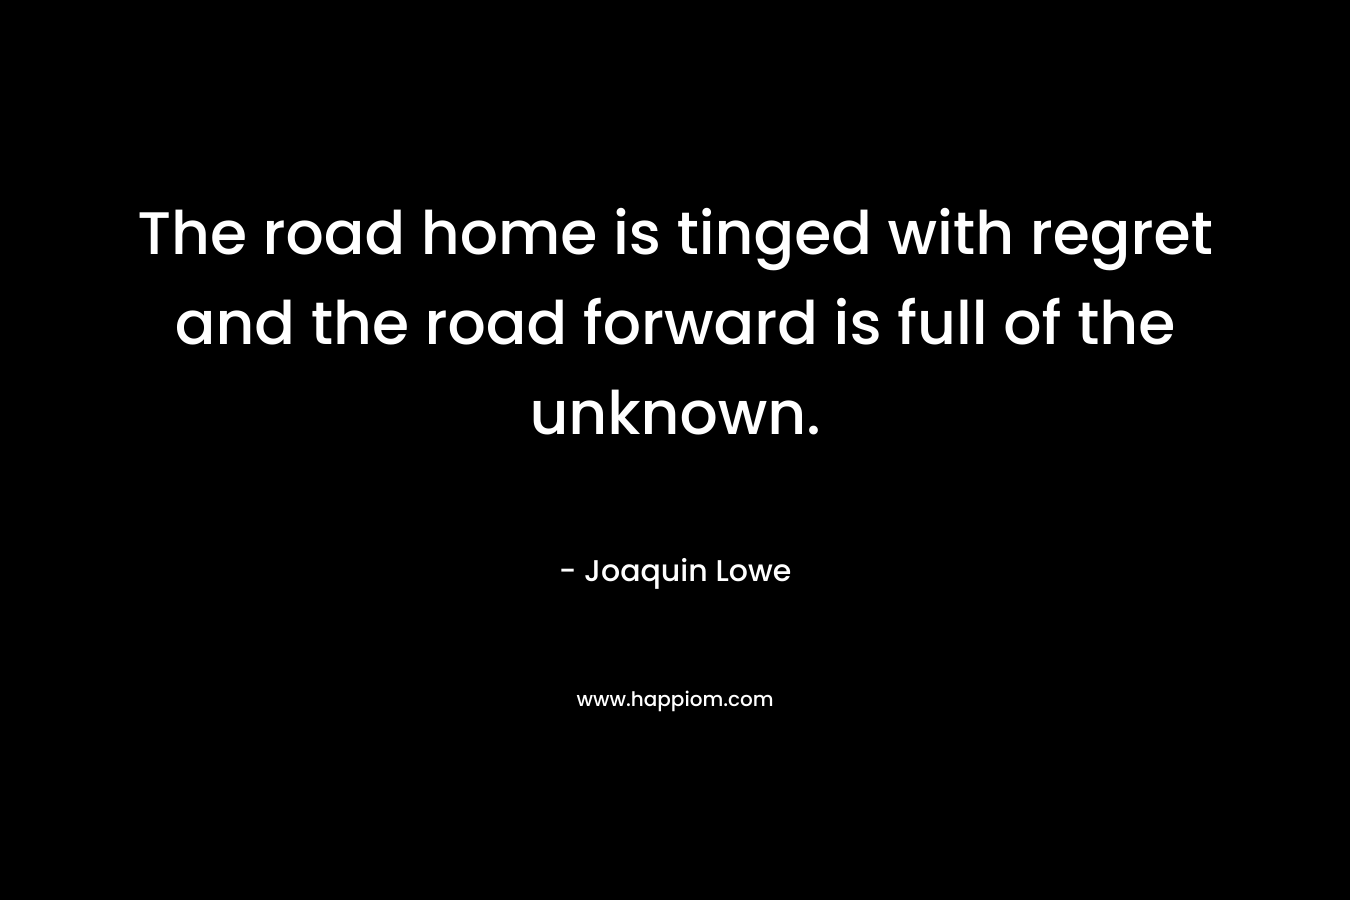 The road home is tinged with regret and the road forward is full of the unknown.